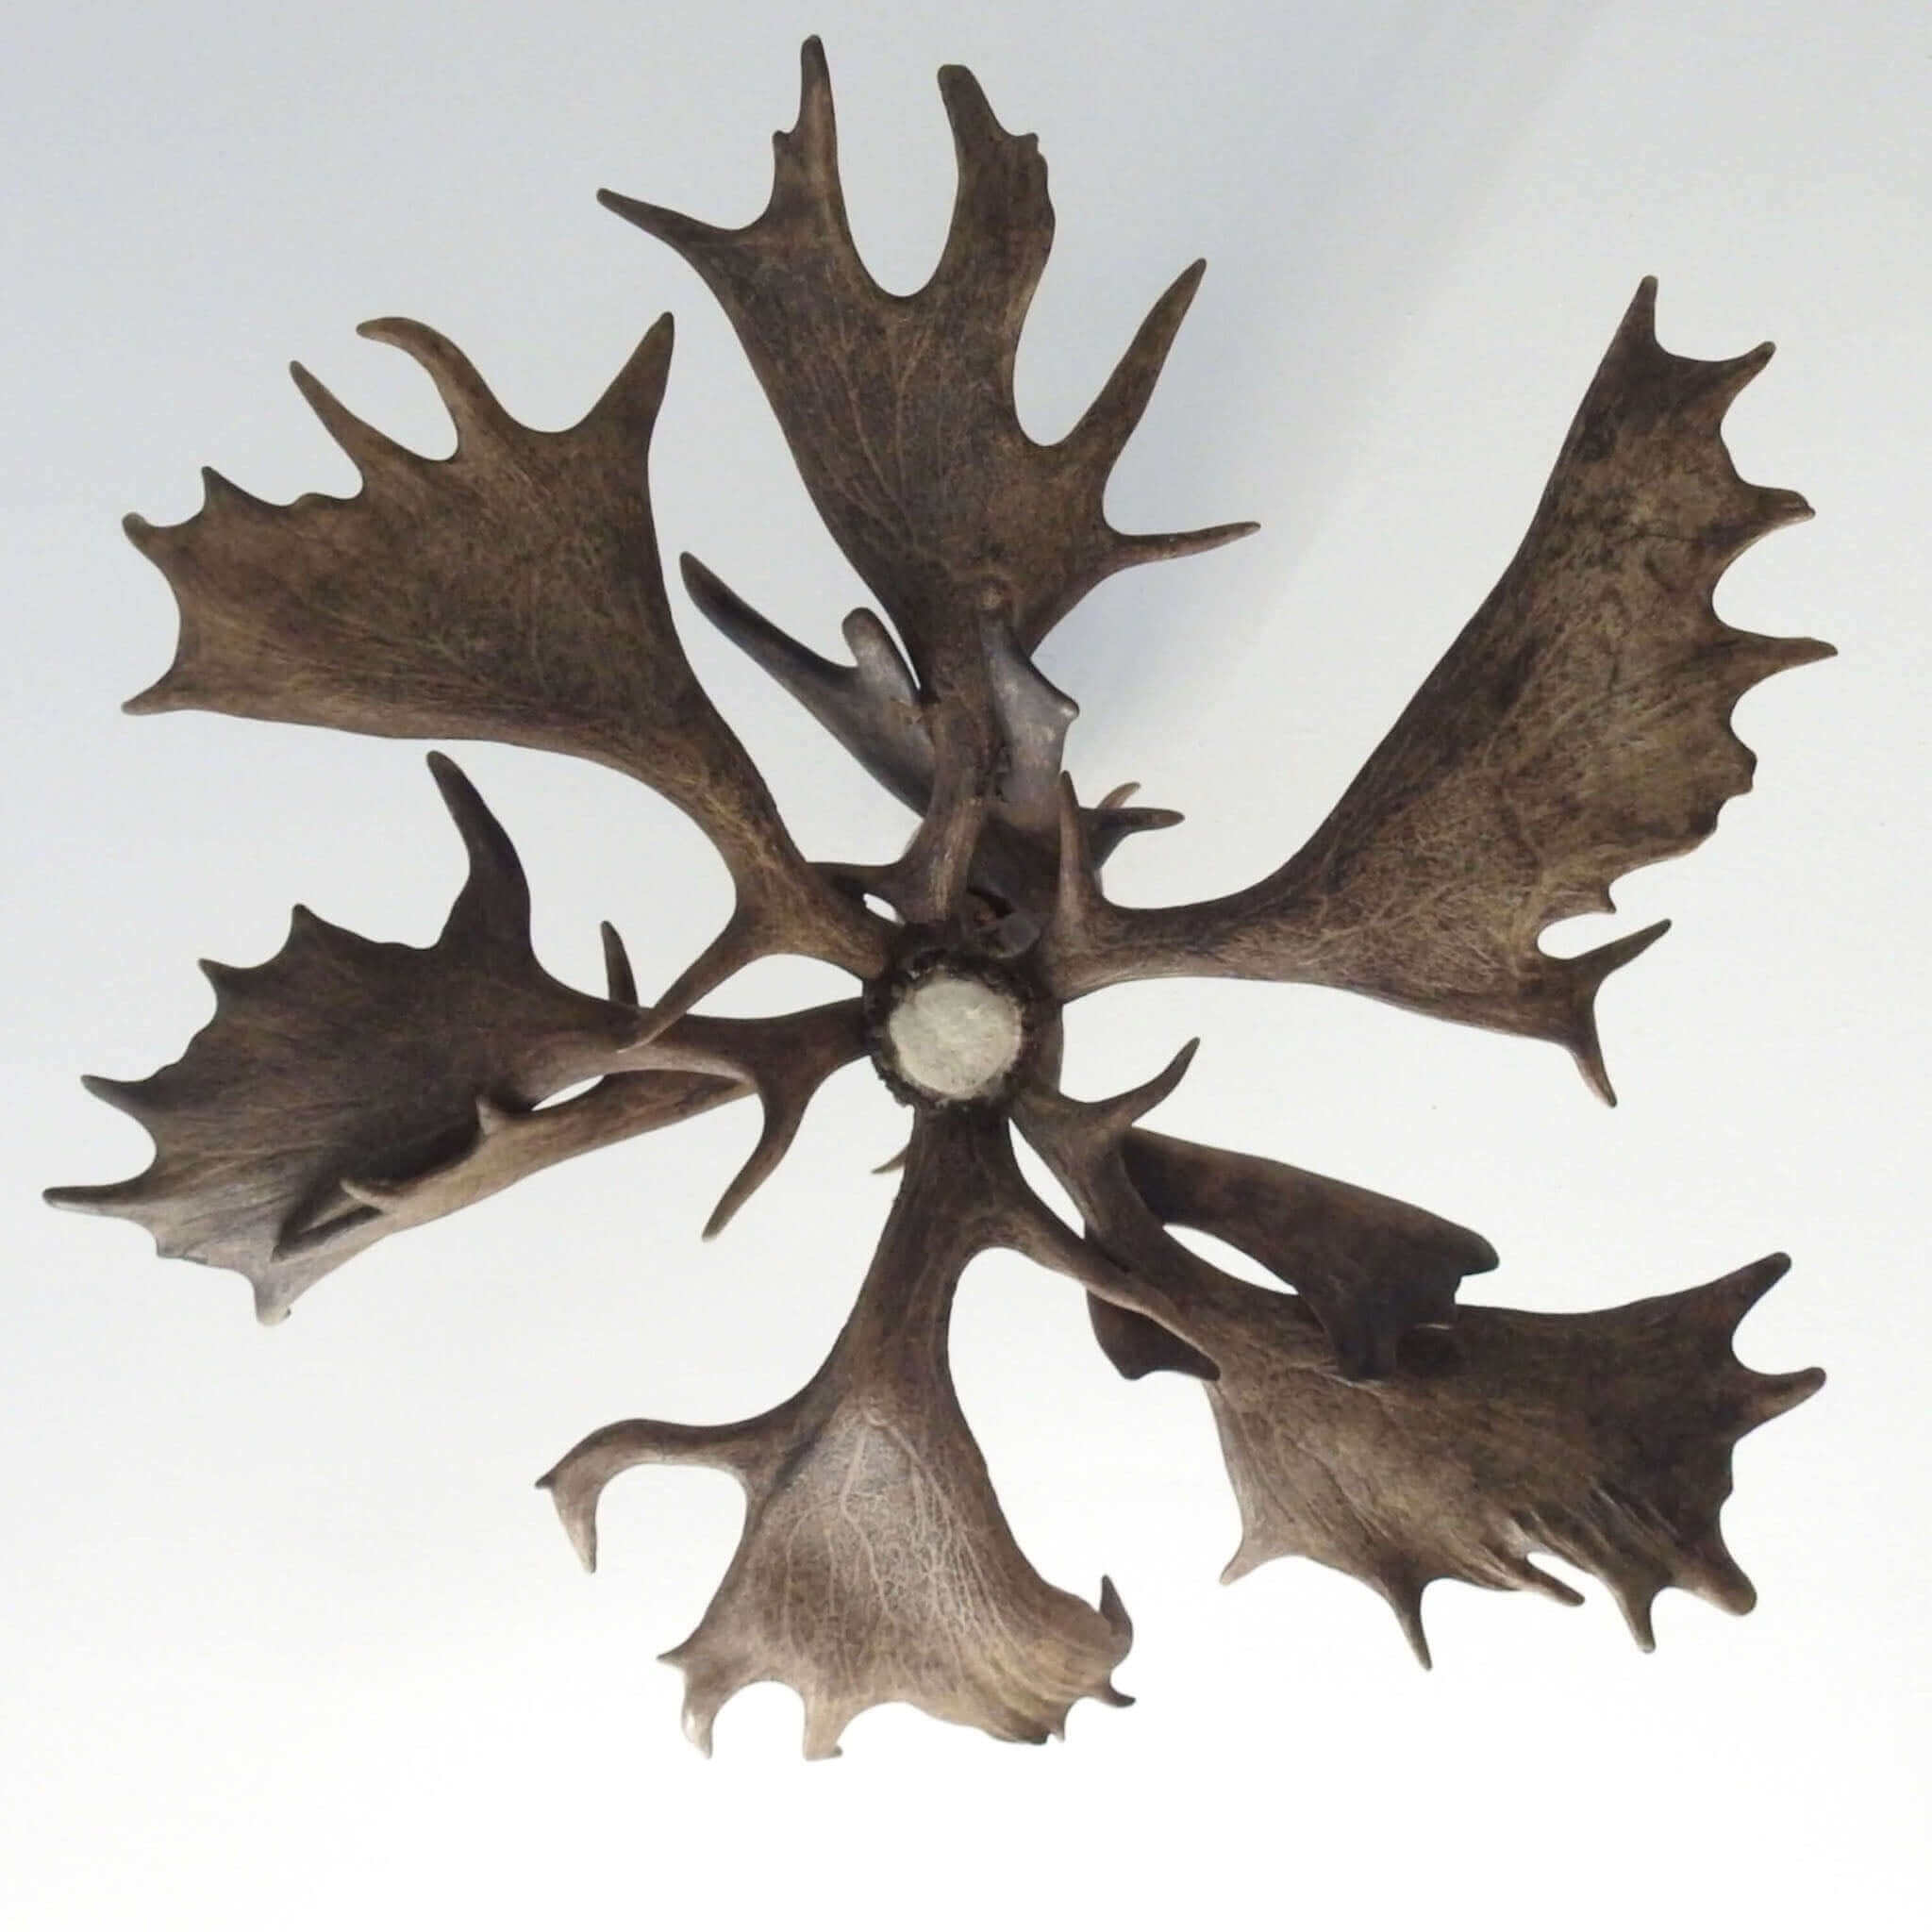 Antler chandelier for 6 lights, view from the bottom.